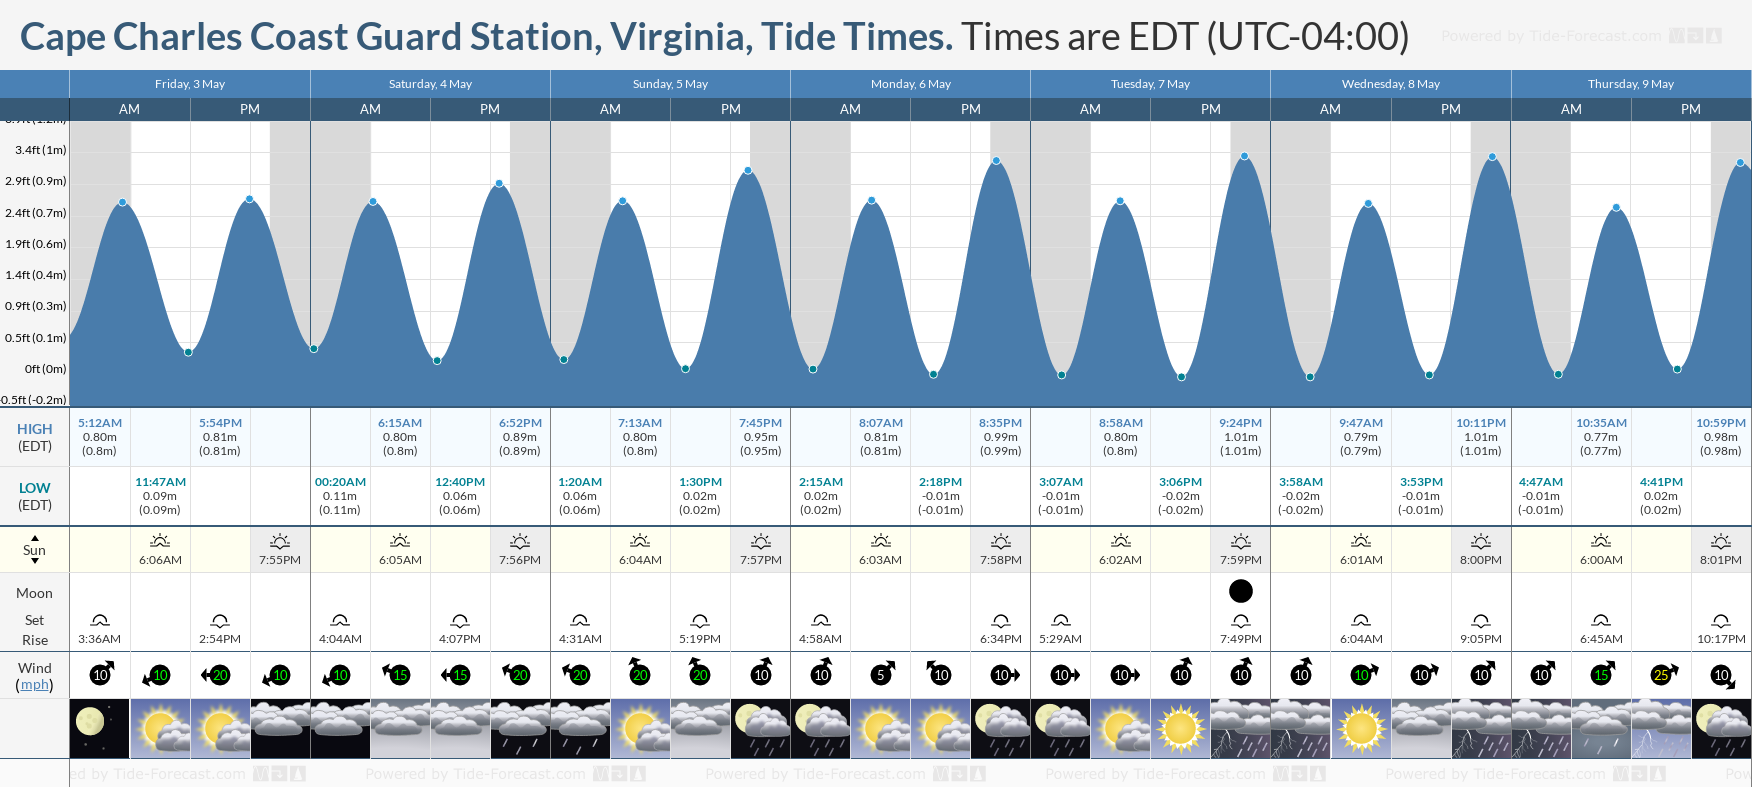 Cape Charles Coast Guard Station, Virginia Tide Chart including high and low tide tide times for the next 7 days